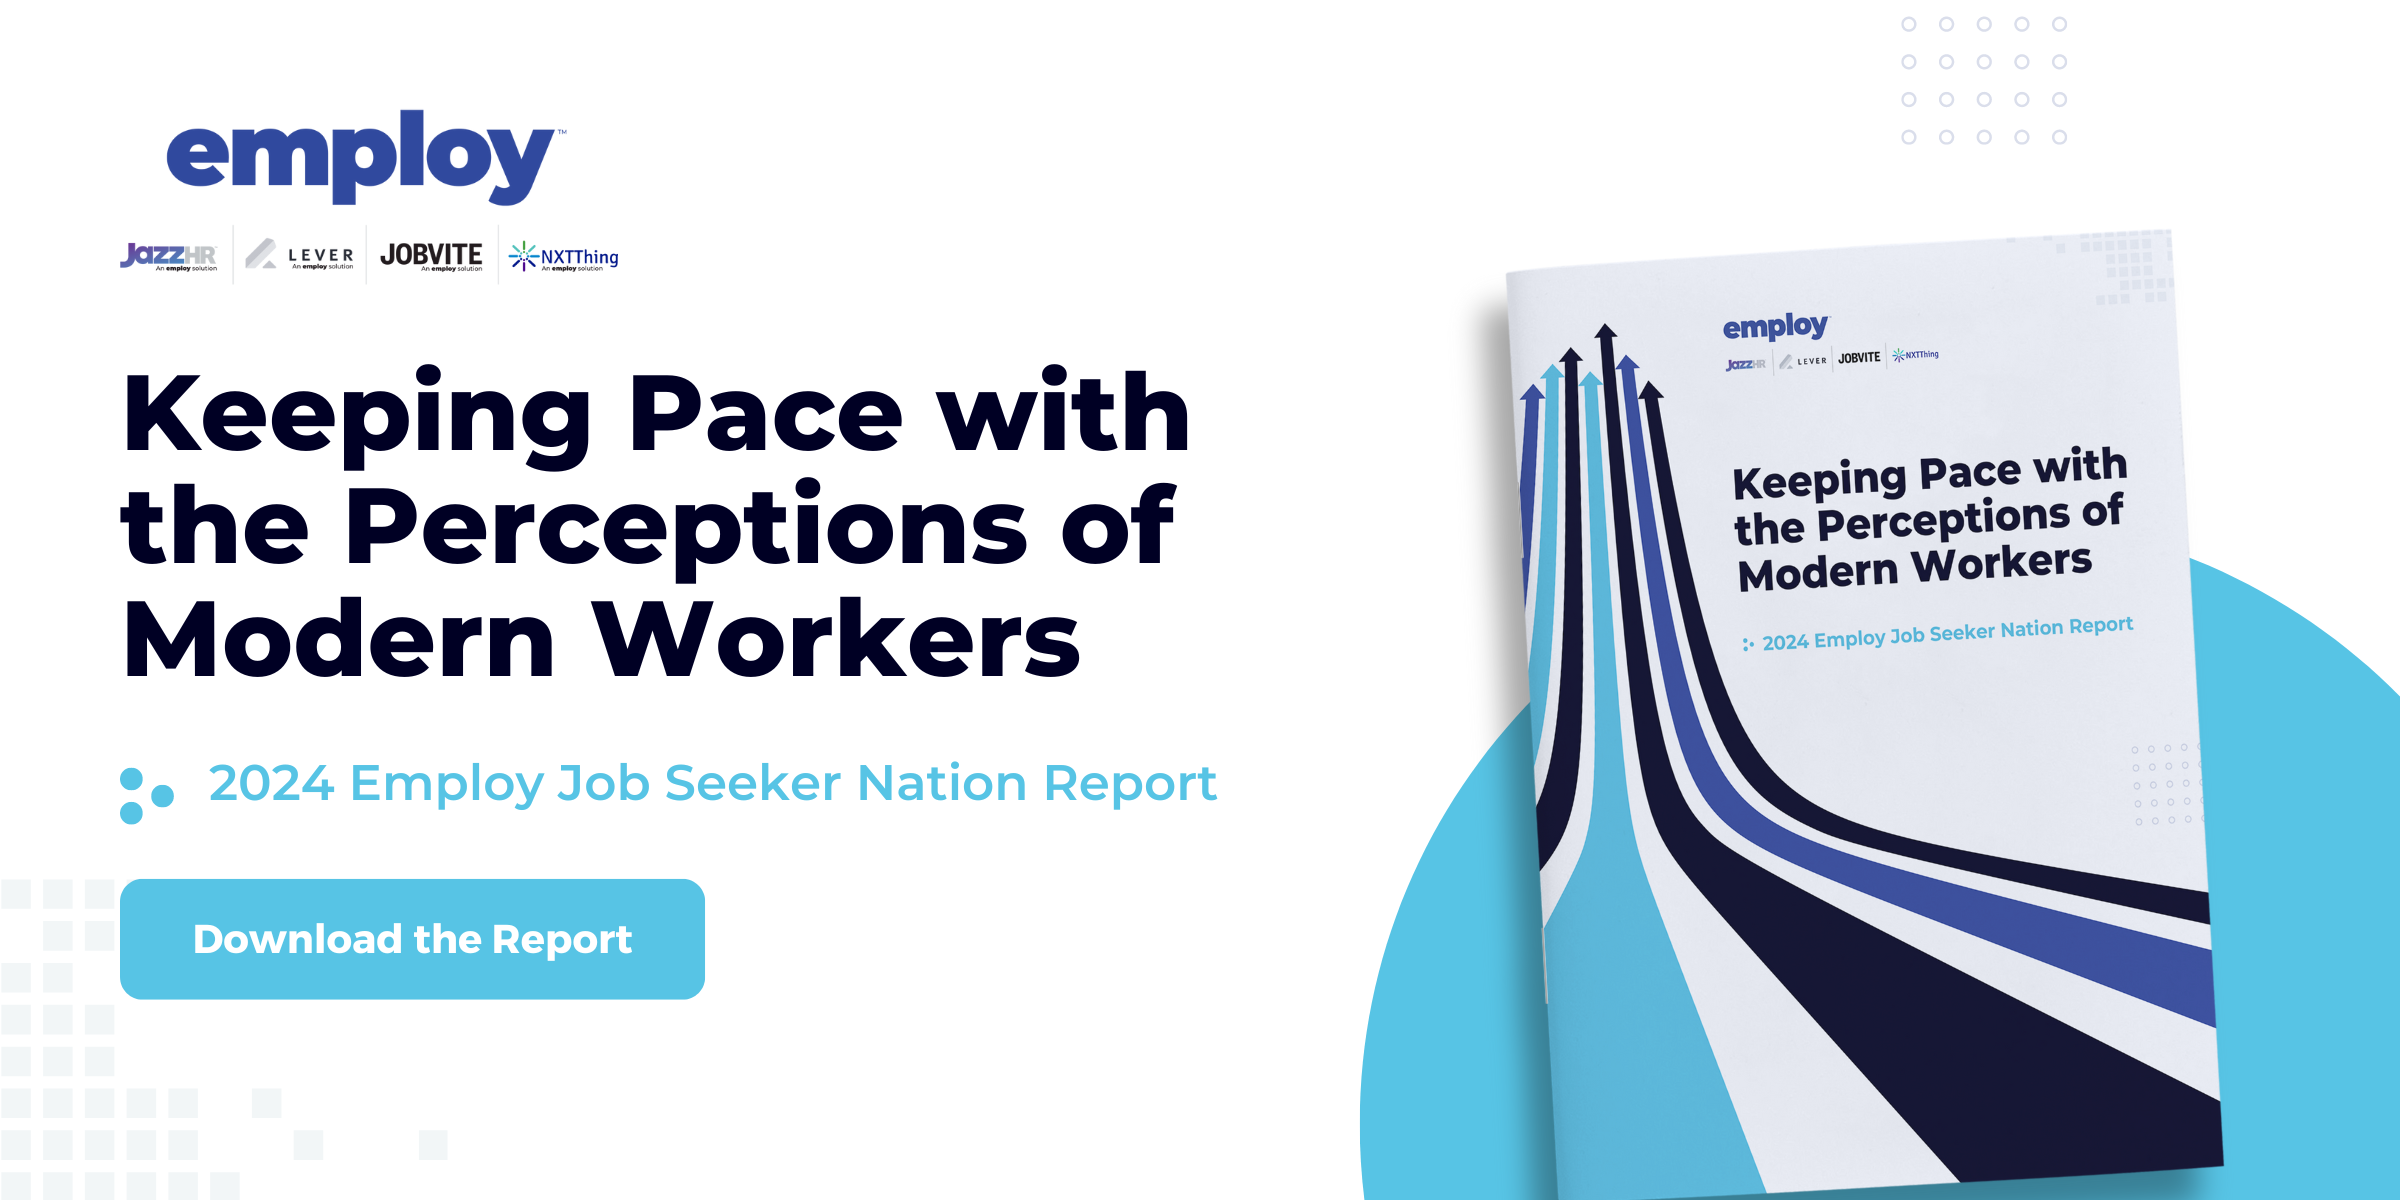 Click here to learn more on job seeker motivations and perceptions in this new Job Seeker Nation Report. 